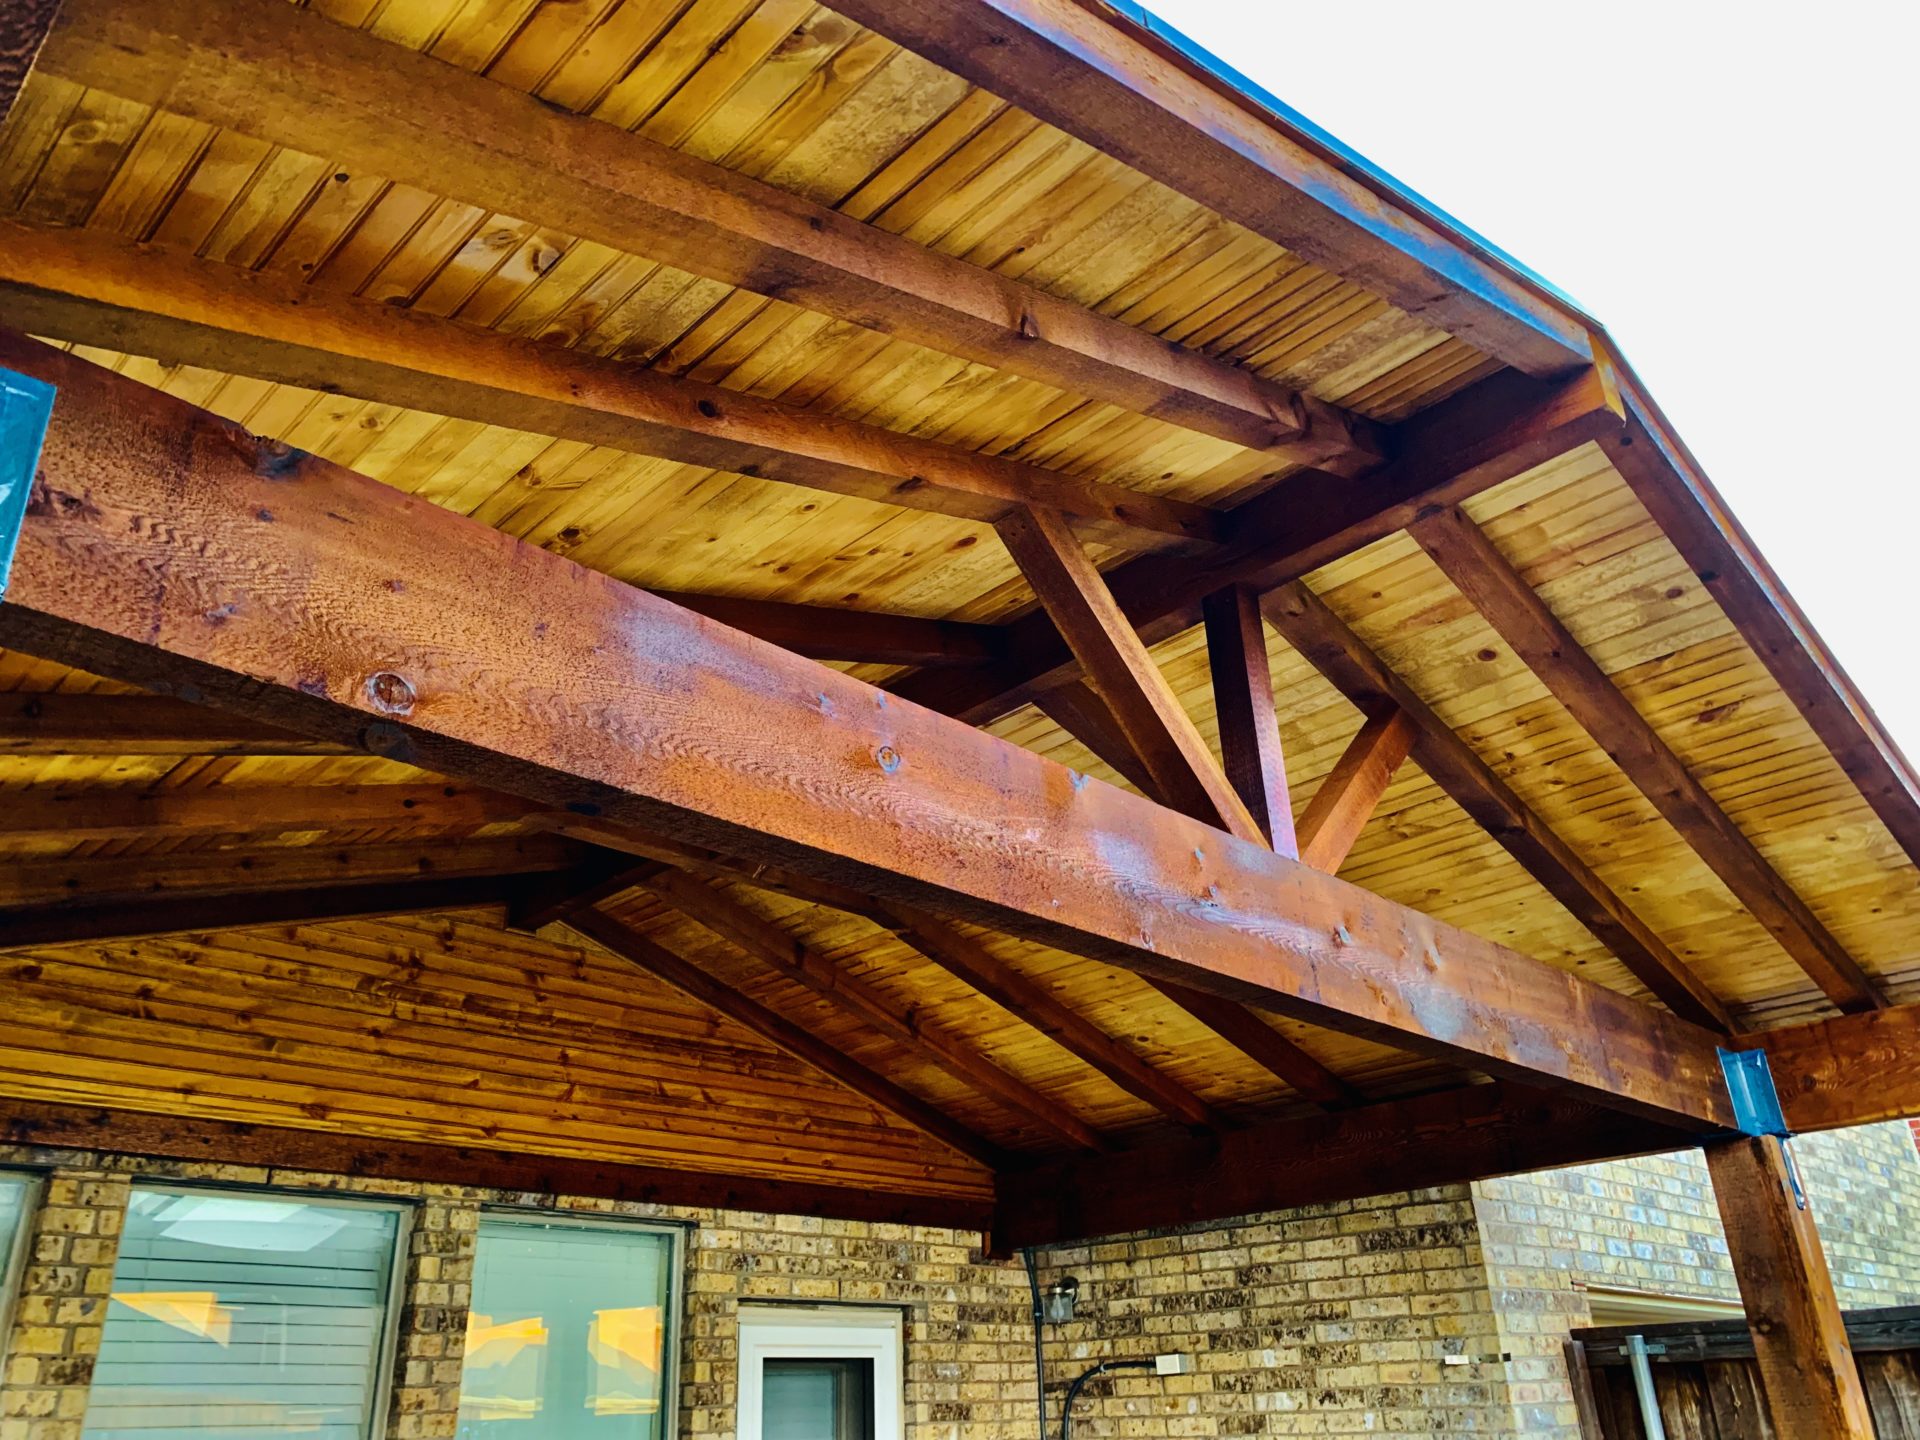 Underneath pavilion patio styled roof with beautiful wooden cross beams.